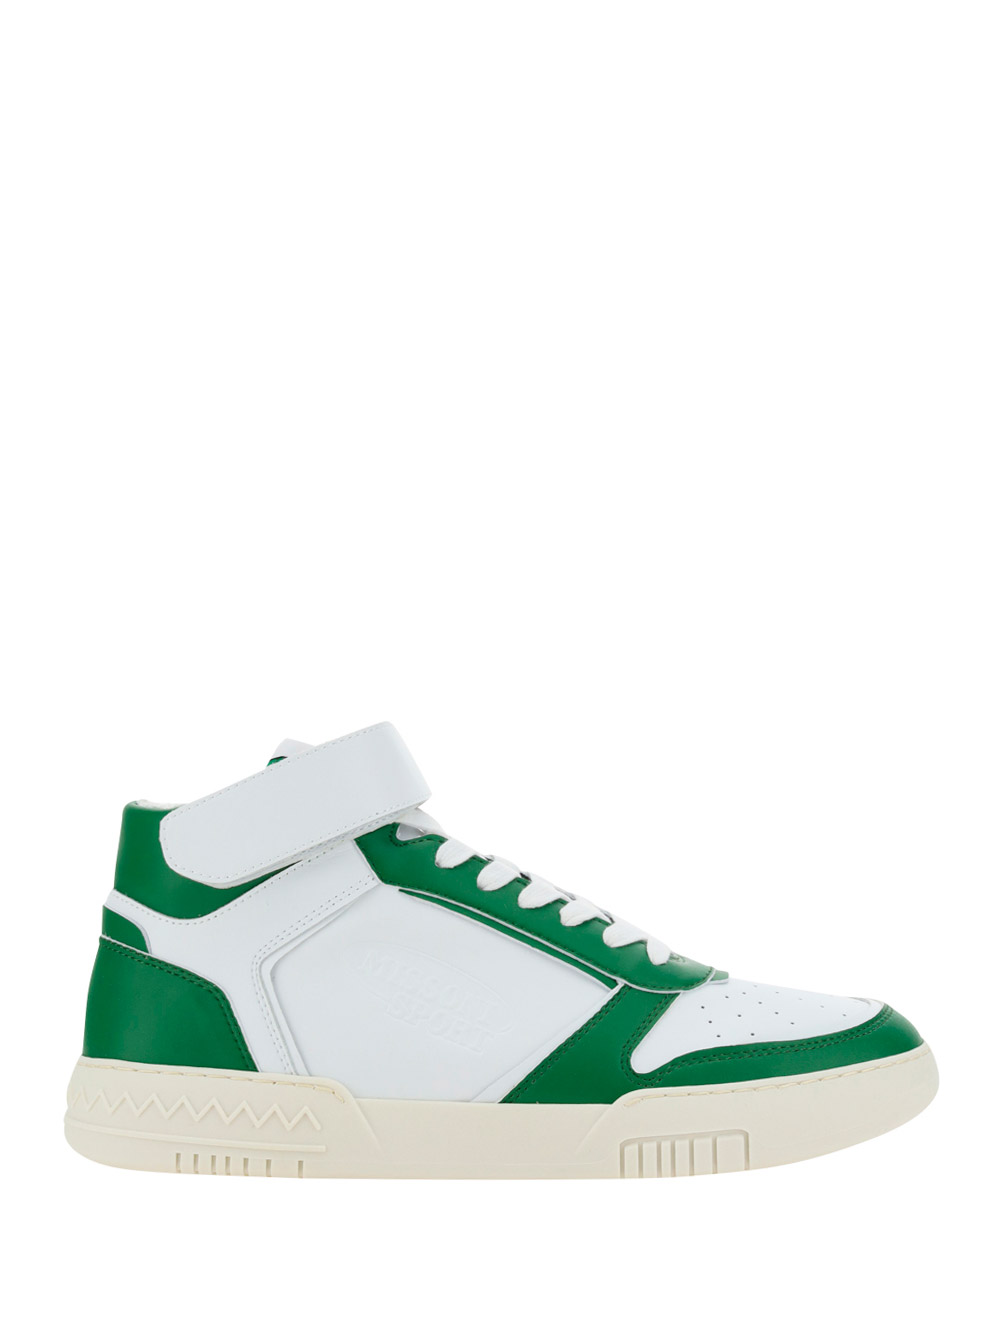 Acbc X Missoni Sneakers In Green/white